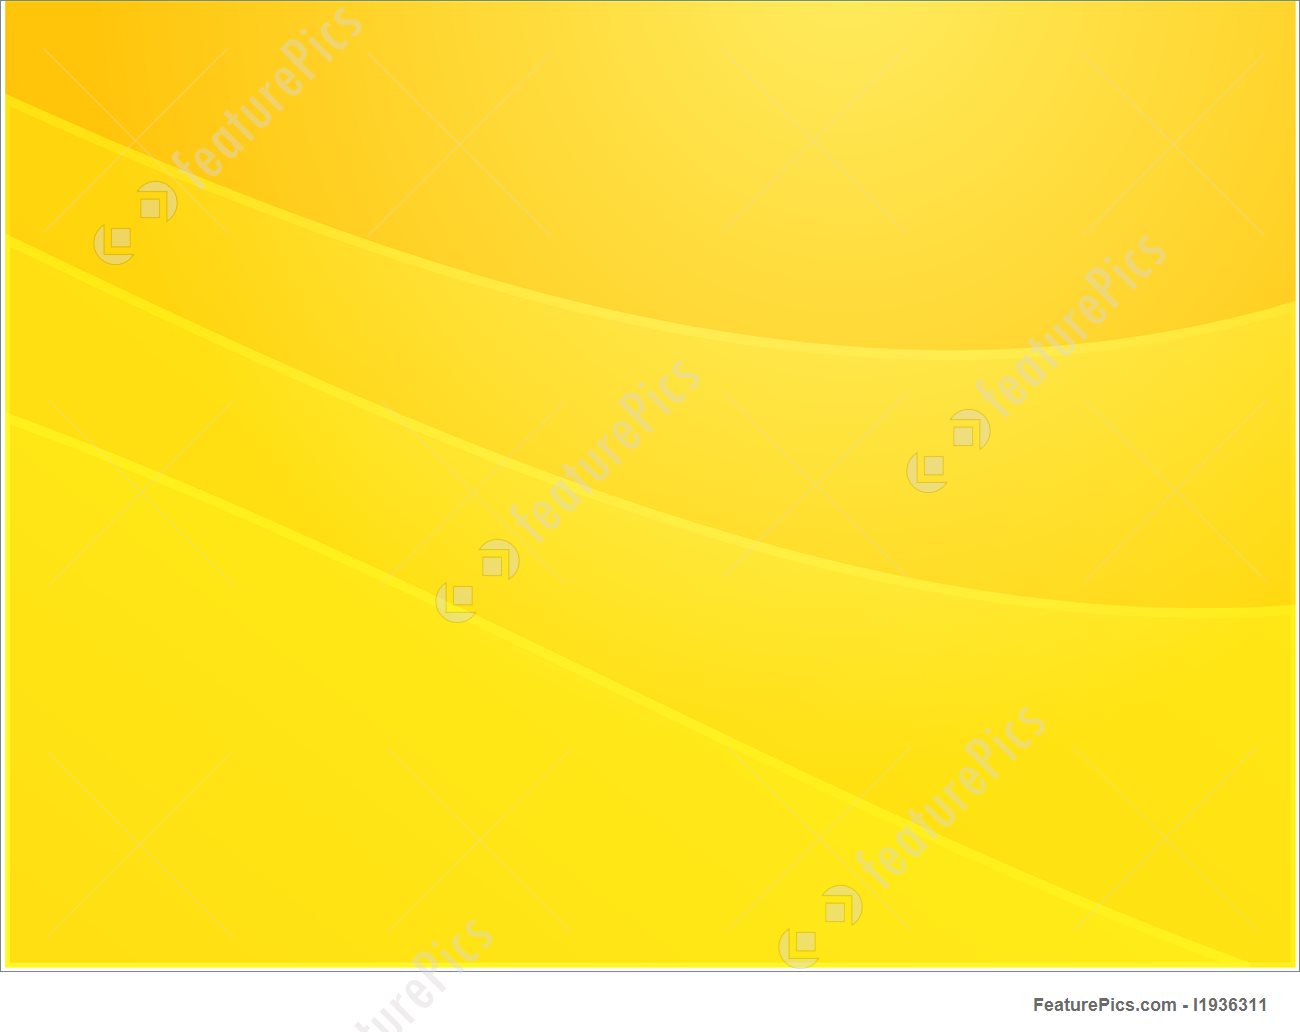 Abstract Wallpaper Design With Smooth Curves Of Color - Close-up - HD Wallpaper 